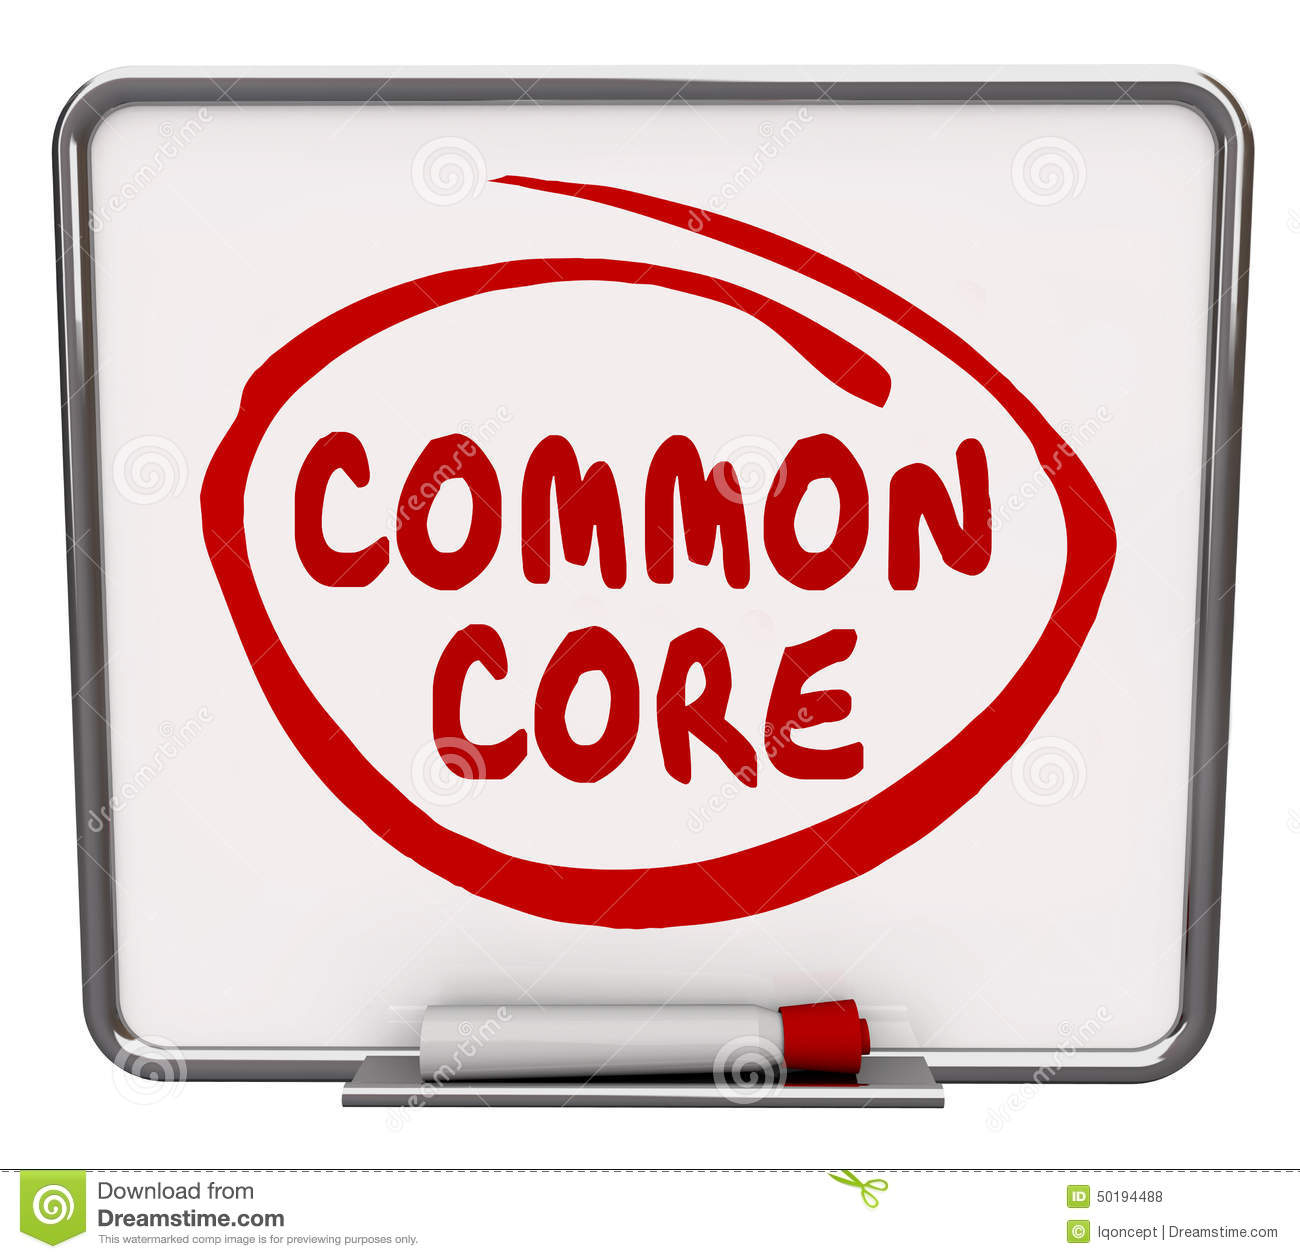 Common Core Words Written And Circled By Red Pen Or Marker On A Dry